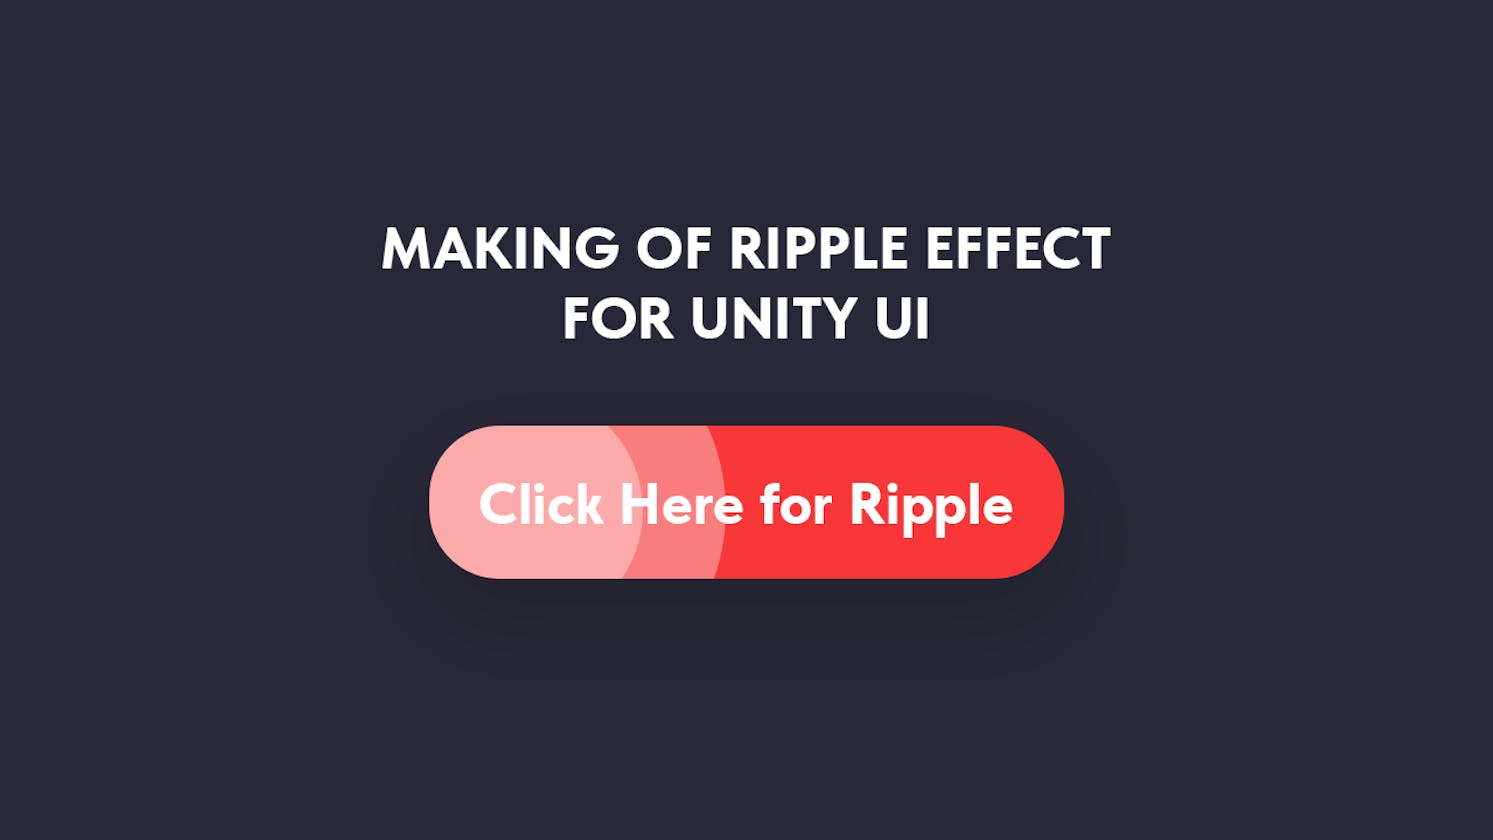 Creating of wave / ripple effect for buttons like in Material Design in Unity